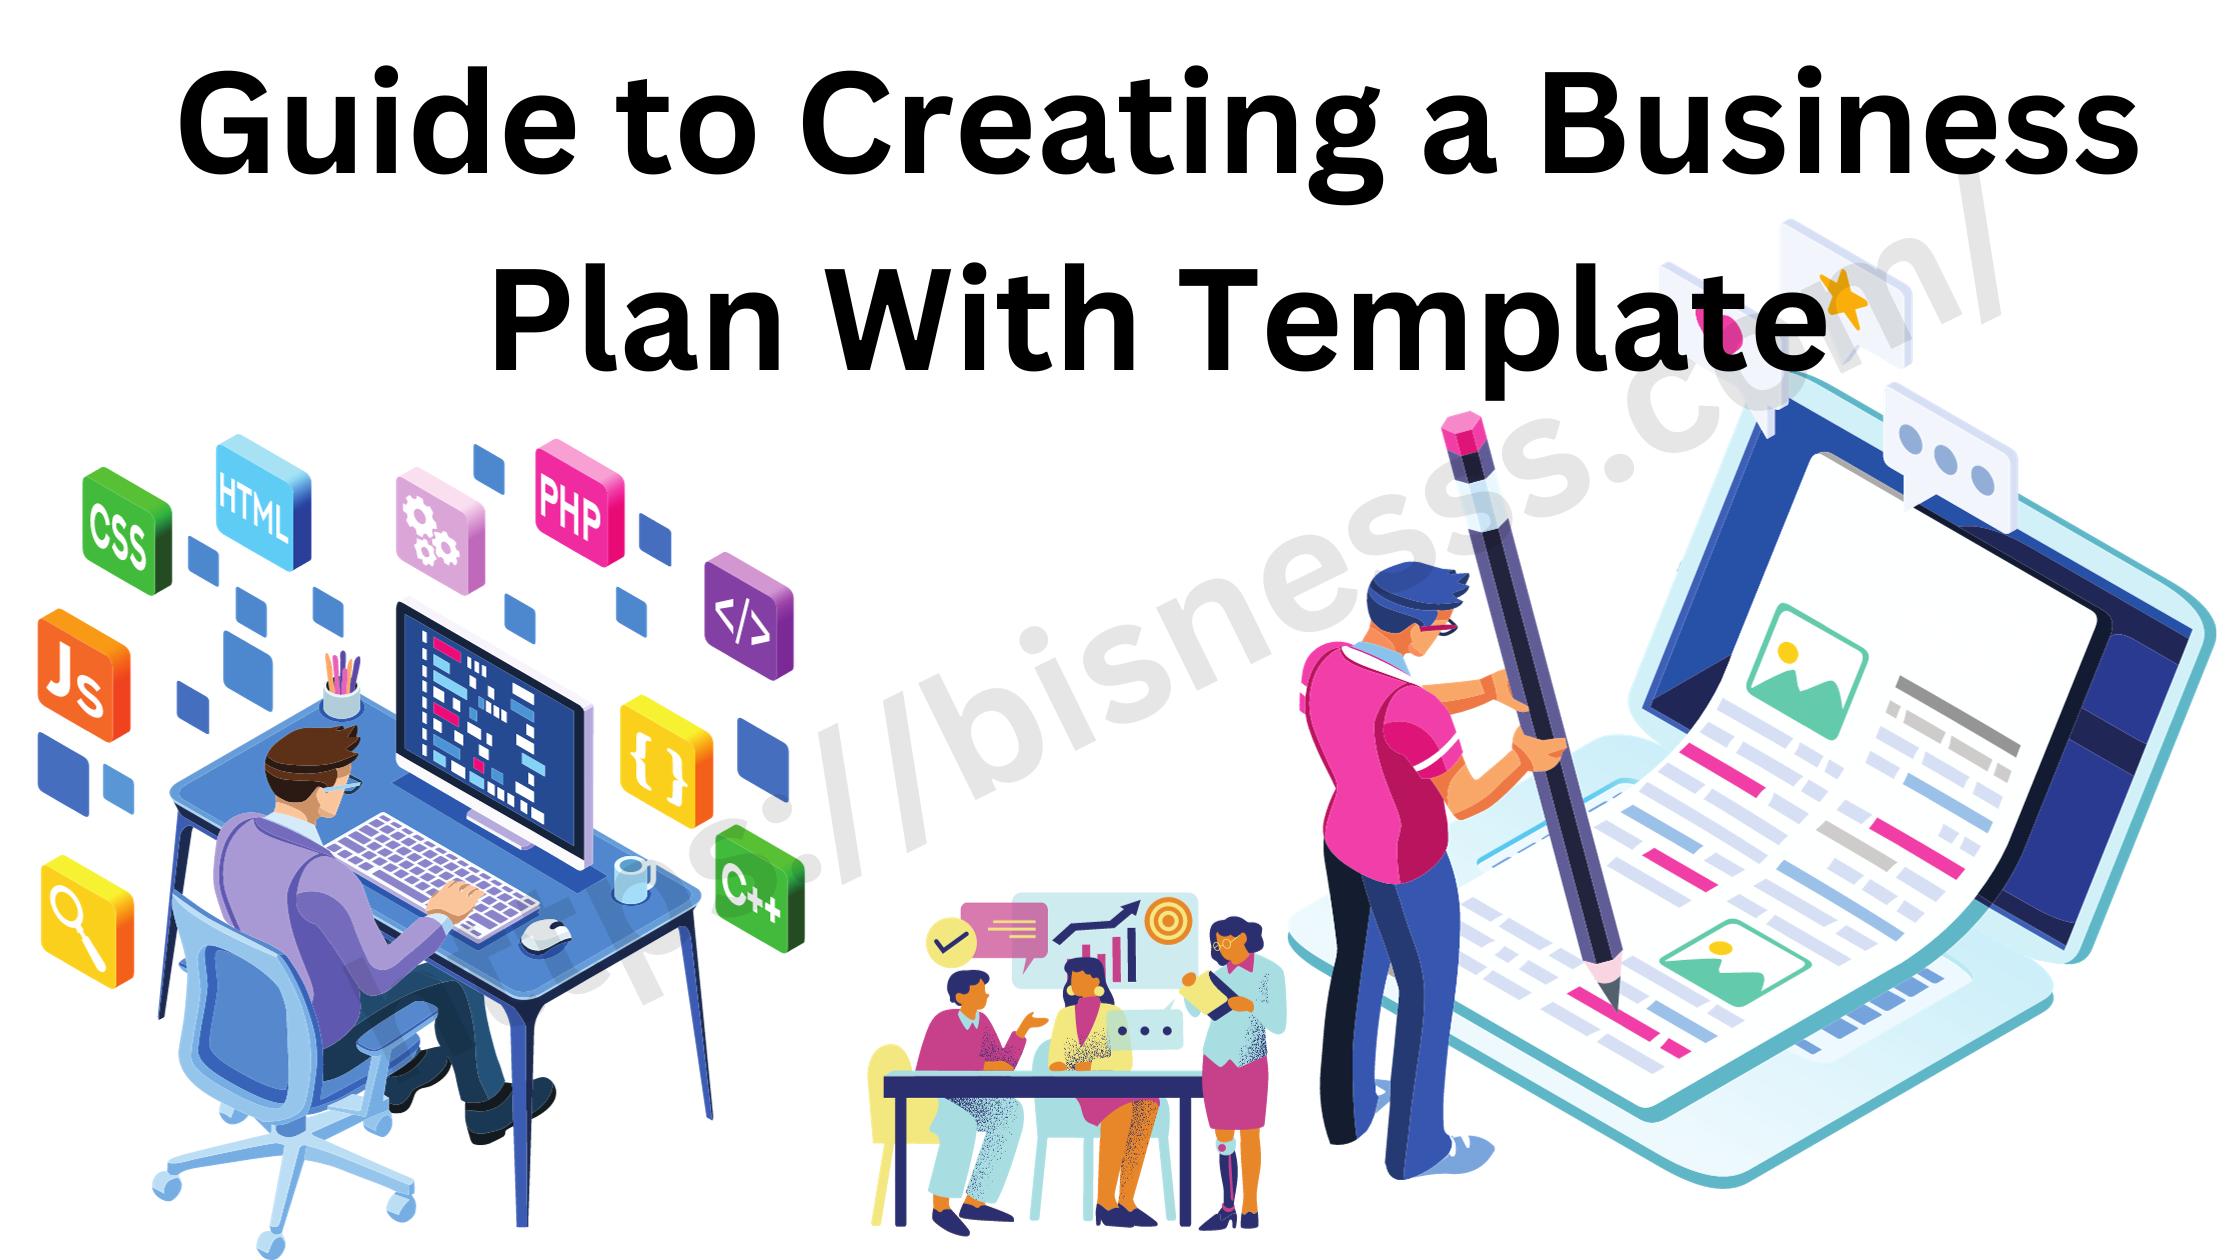 Guide to Creating a Business Plan With Template